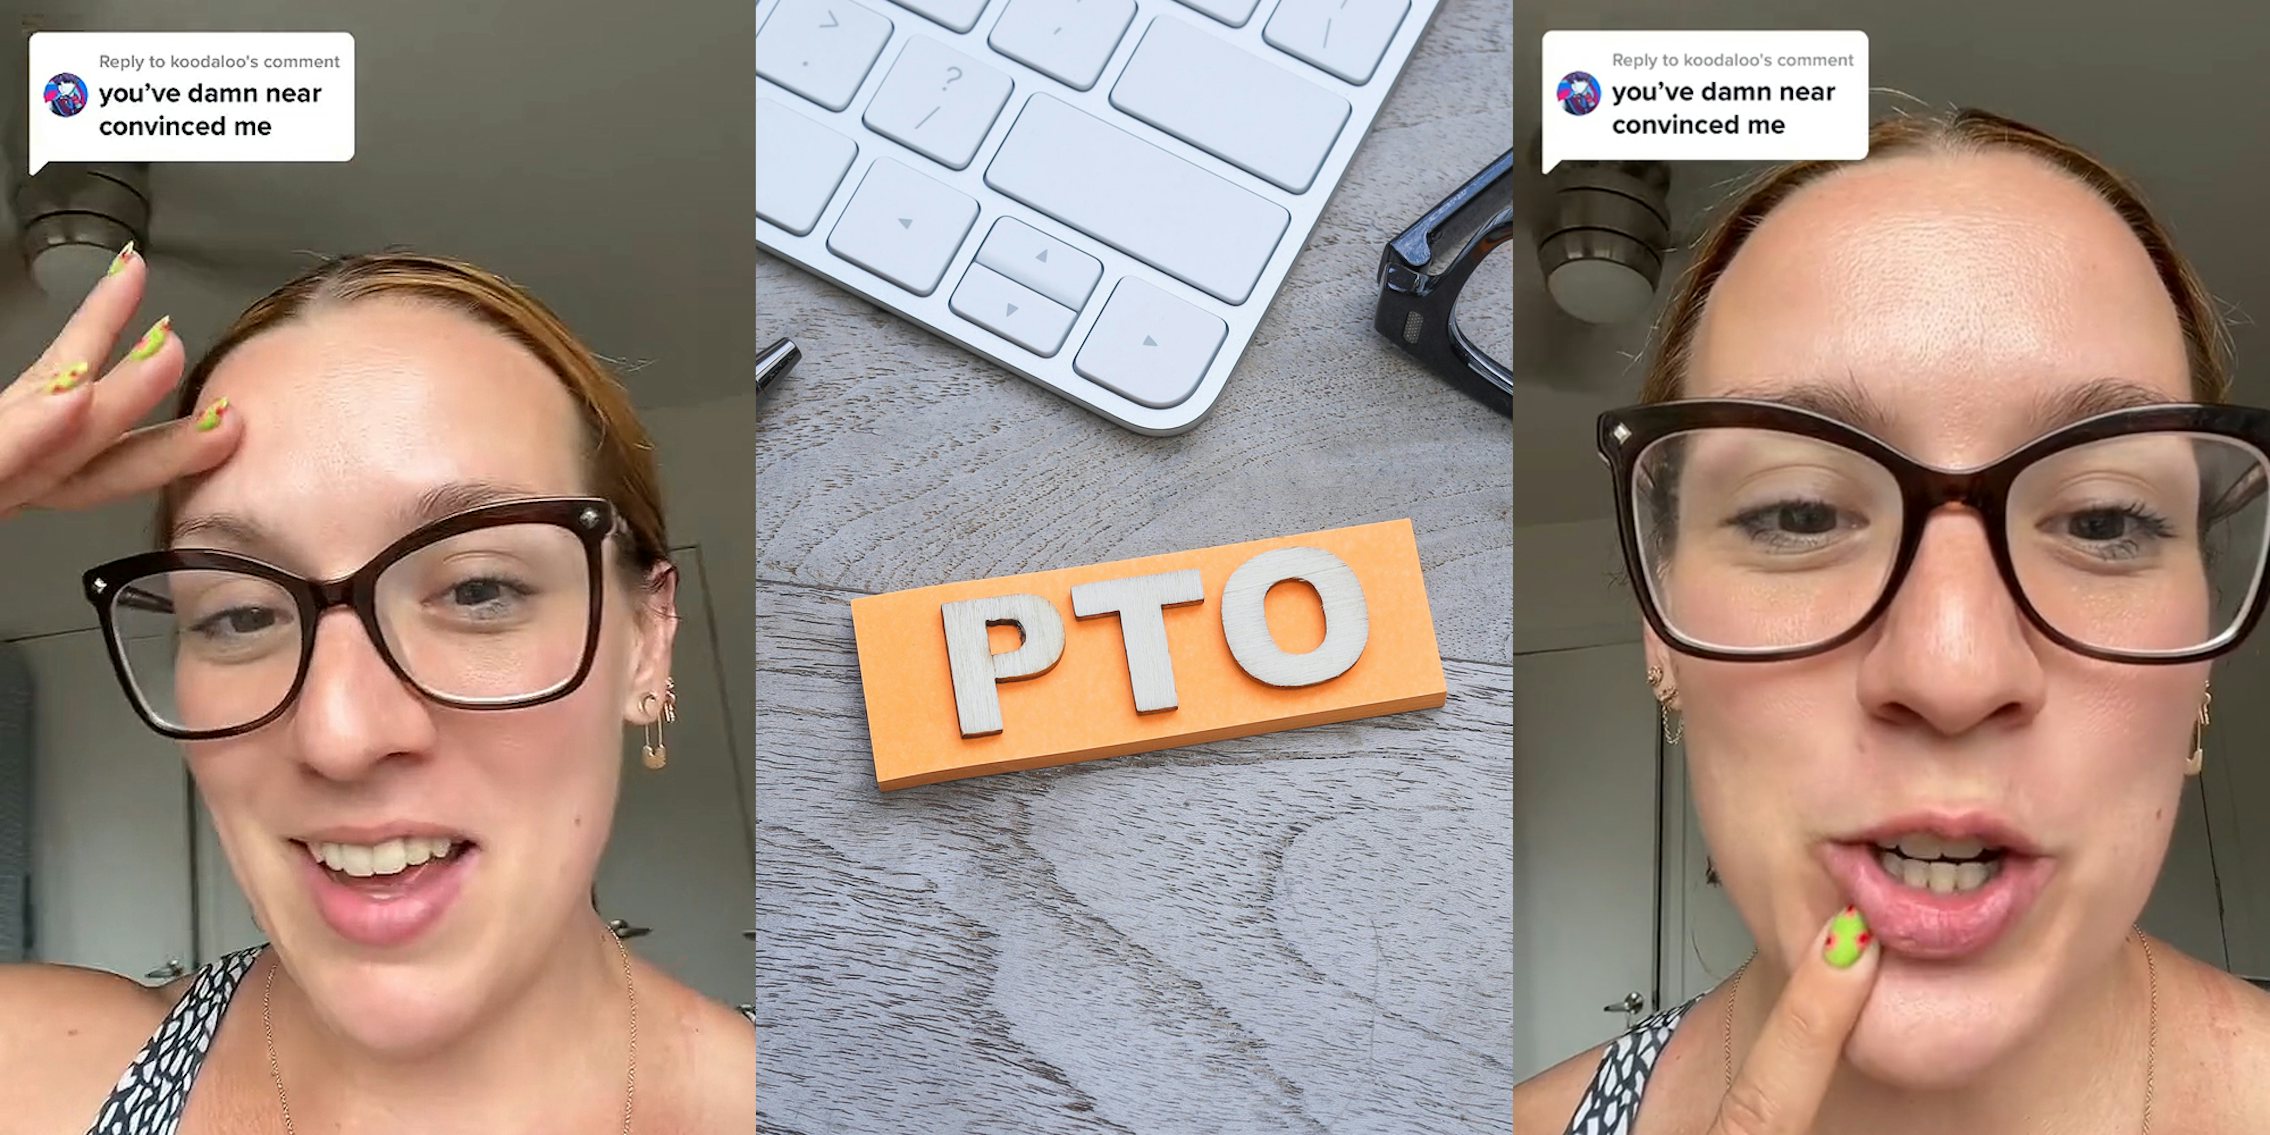 woman speaking hand on forehead caption 'you've damn near convinced me' (l) PTO (Paid Time Off) stamp on gray wood table next to keyboard and glasses (c) woman speaking finger on lip caption 'you've damn near convinced me' (r)